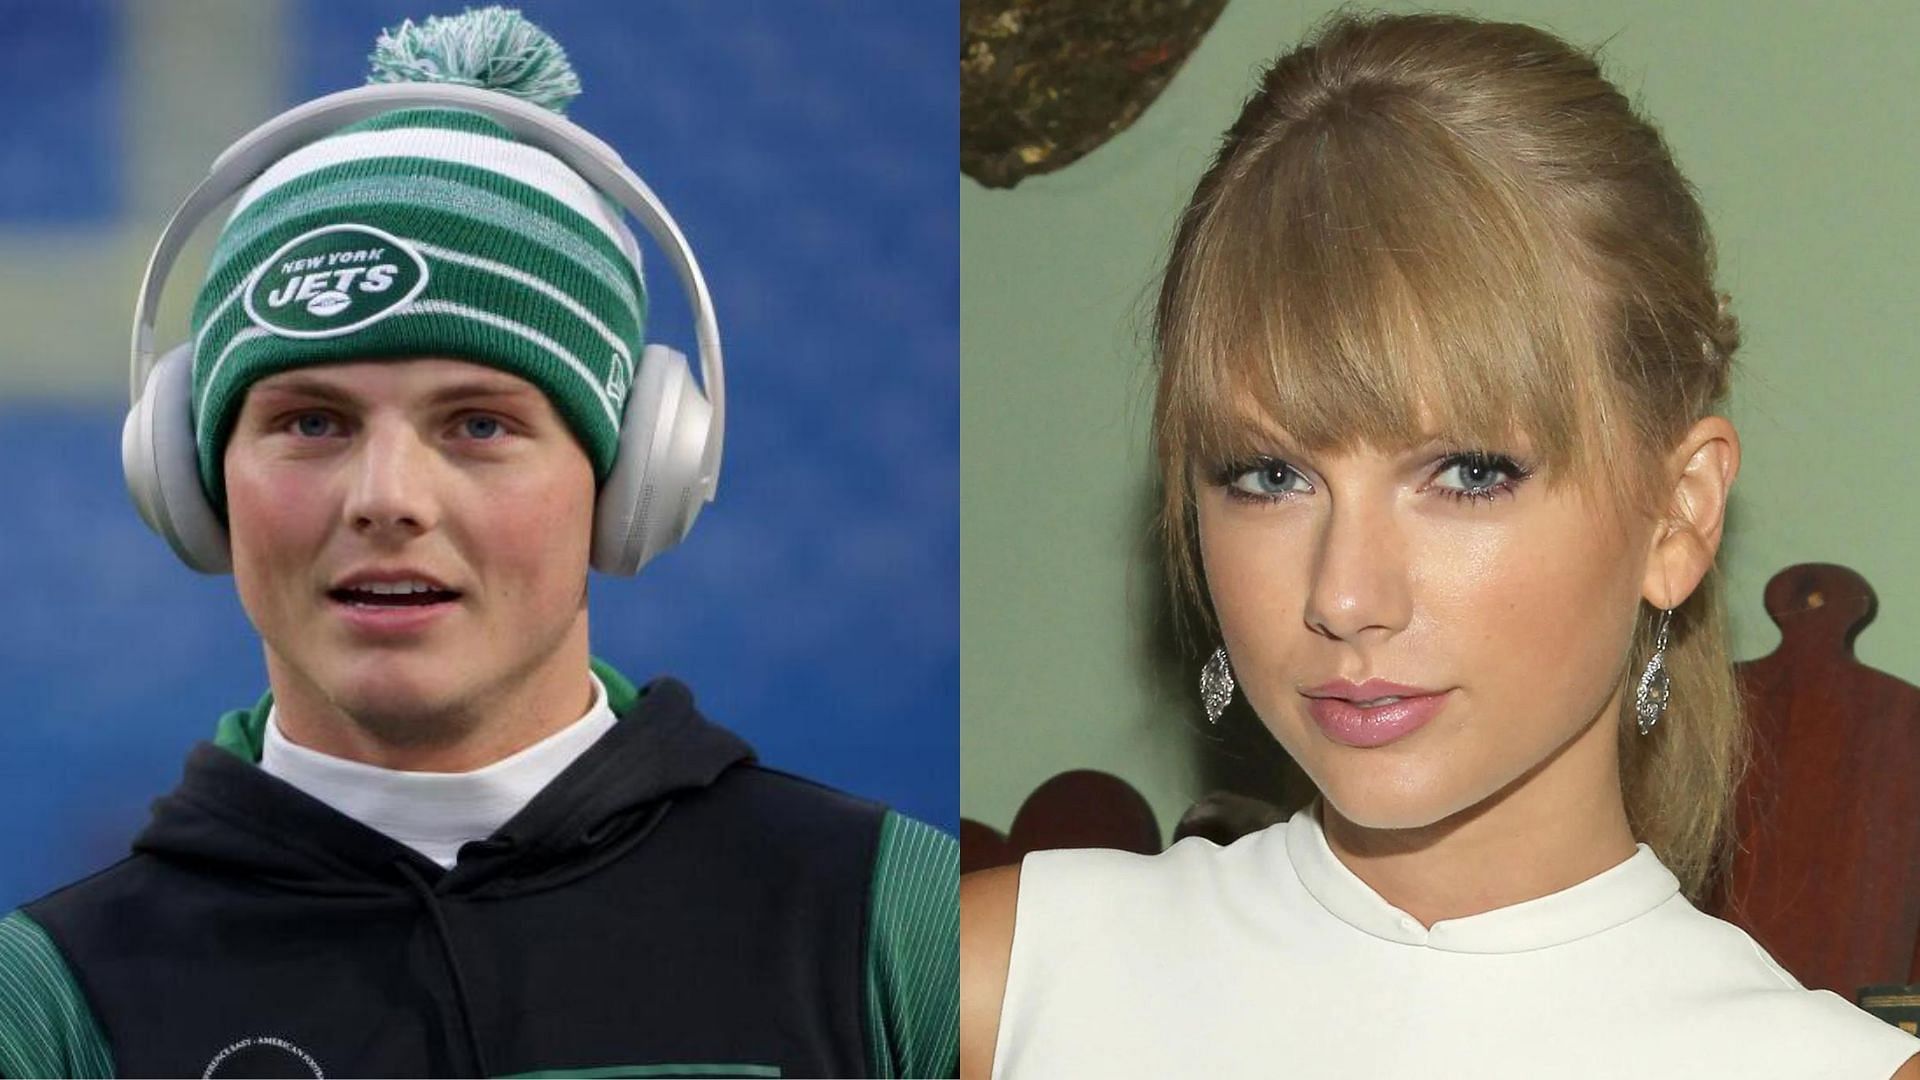 Zach Wilson and Taylor Swift (Image credit: Mike Windle/Getty Images)